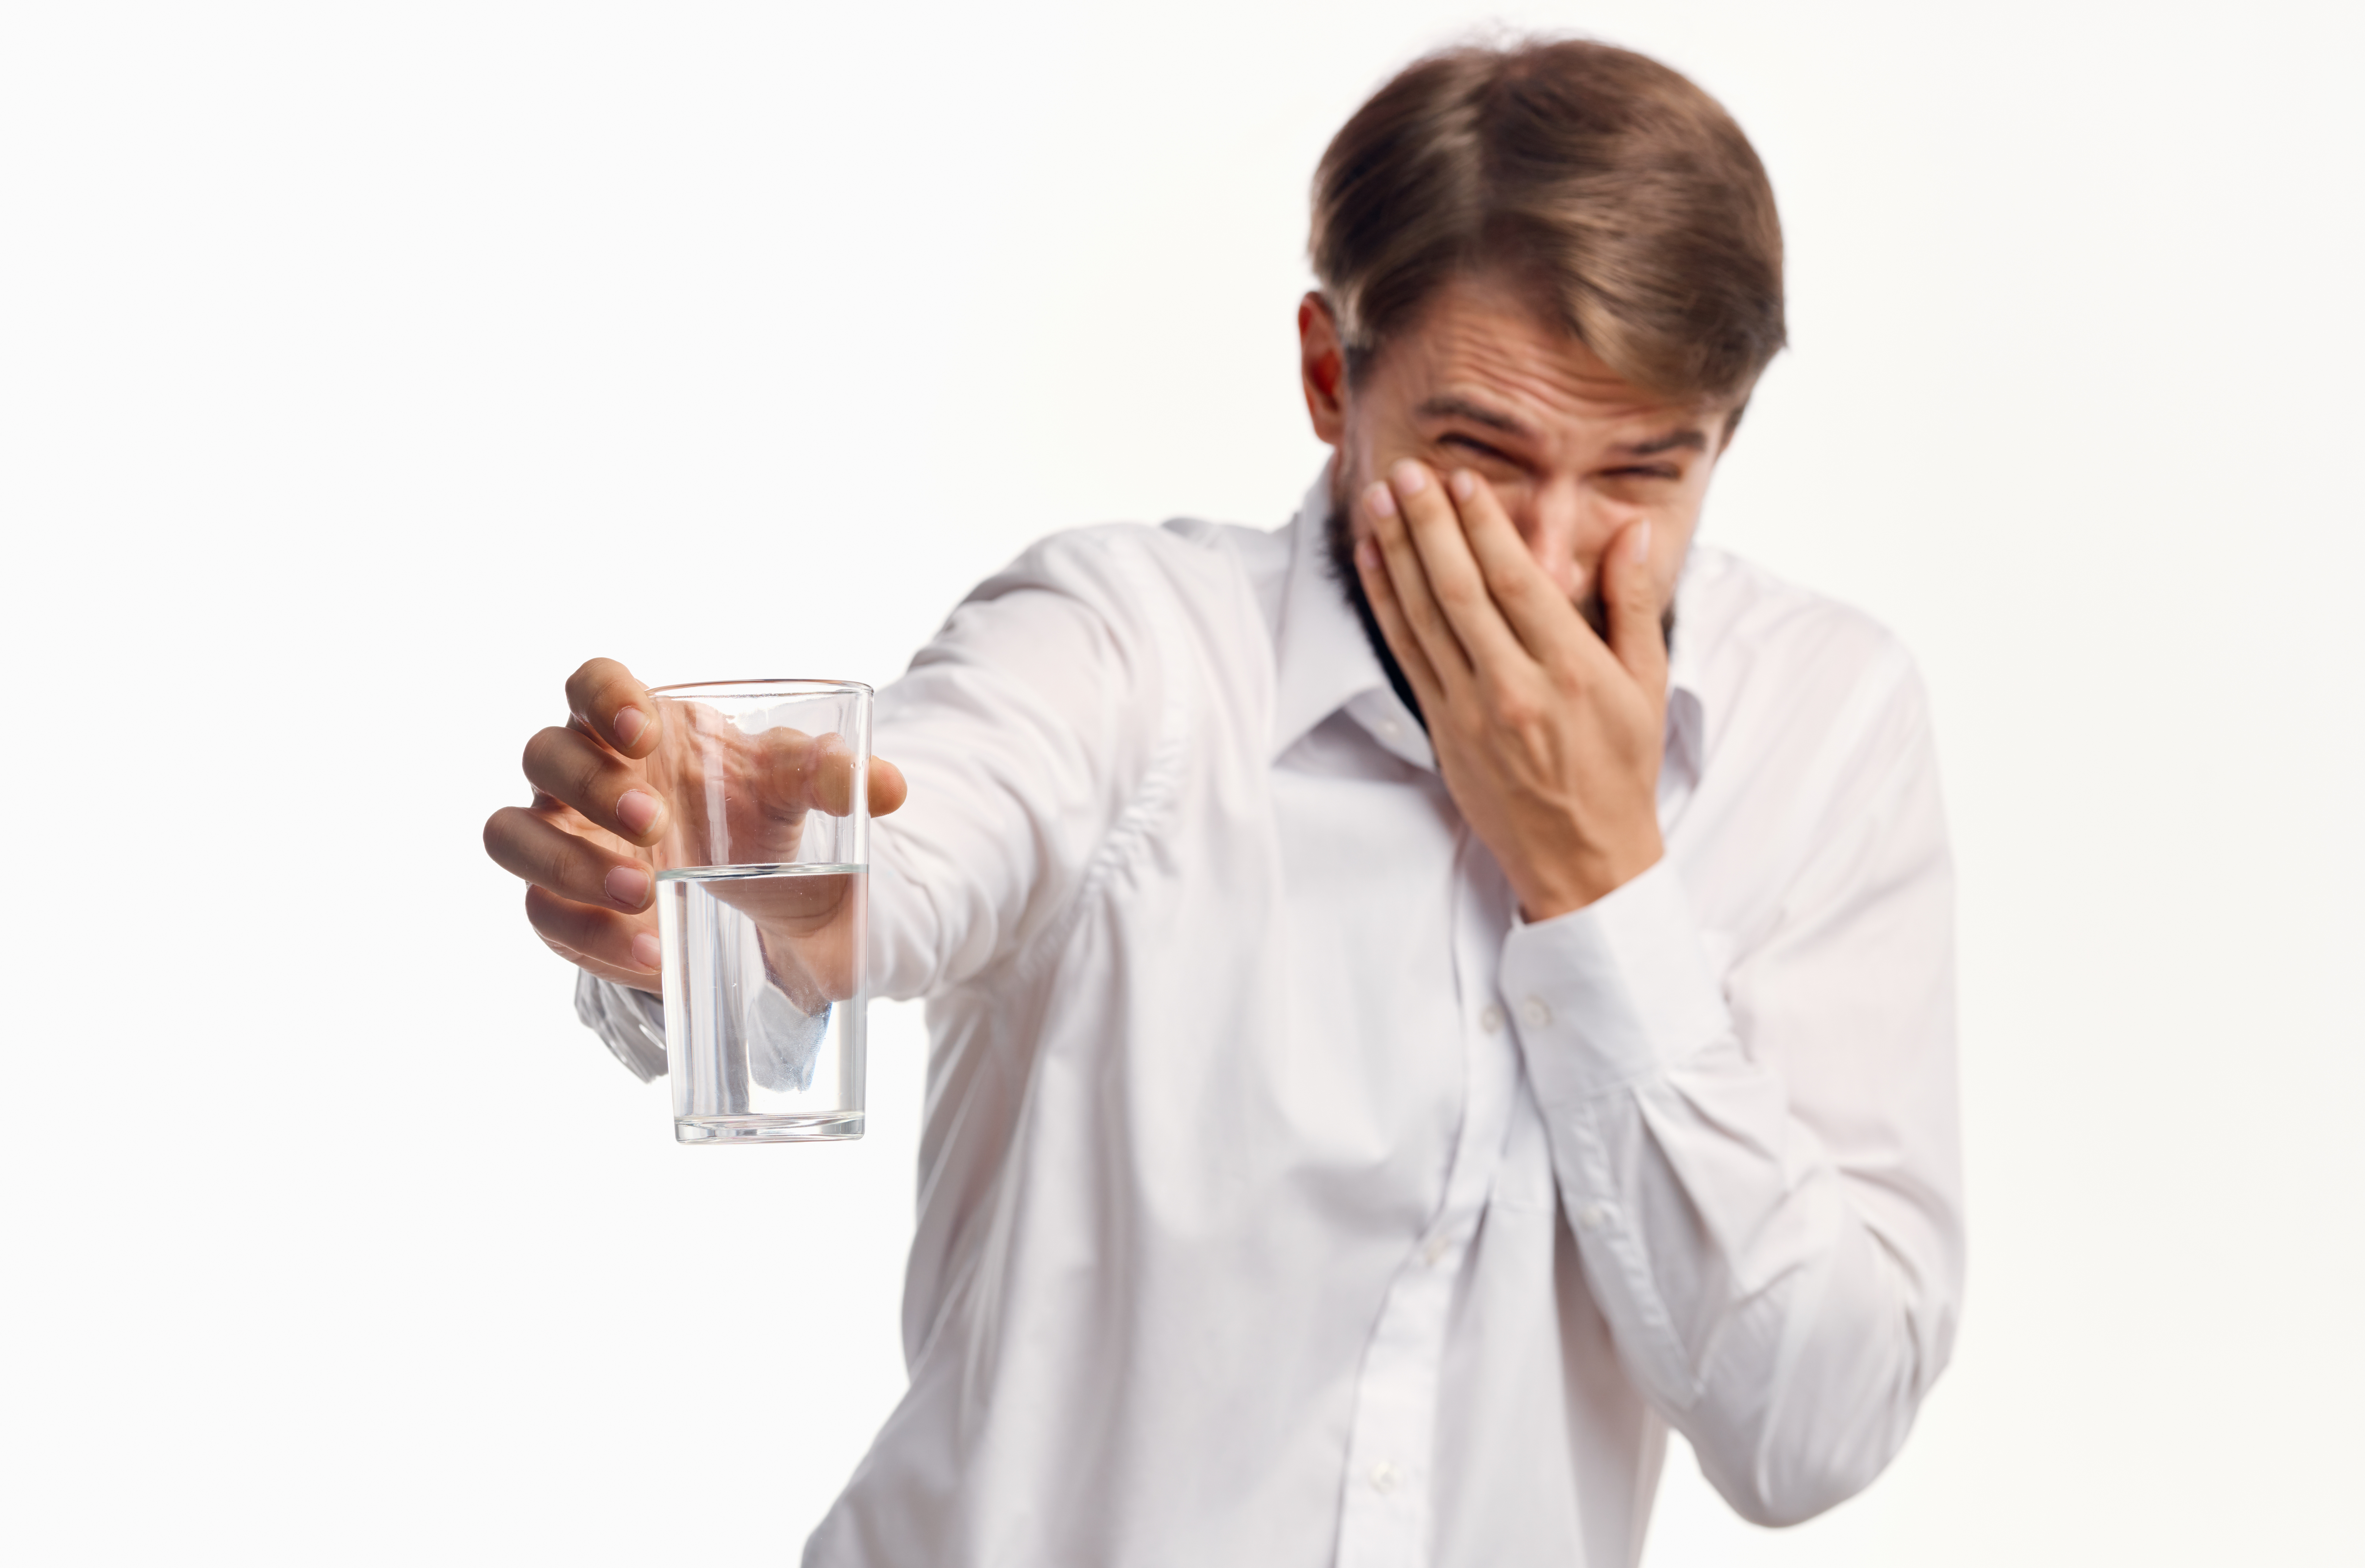 Man turning up his nose at bad smelling water.